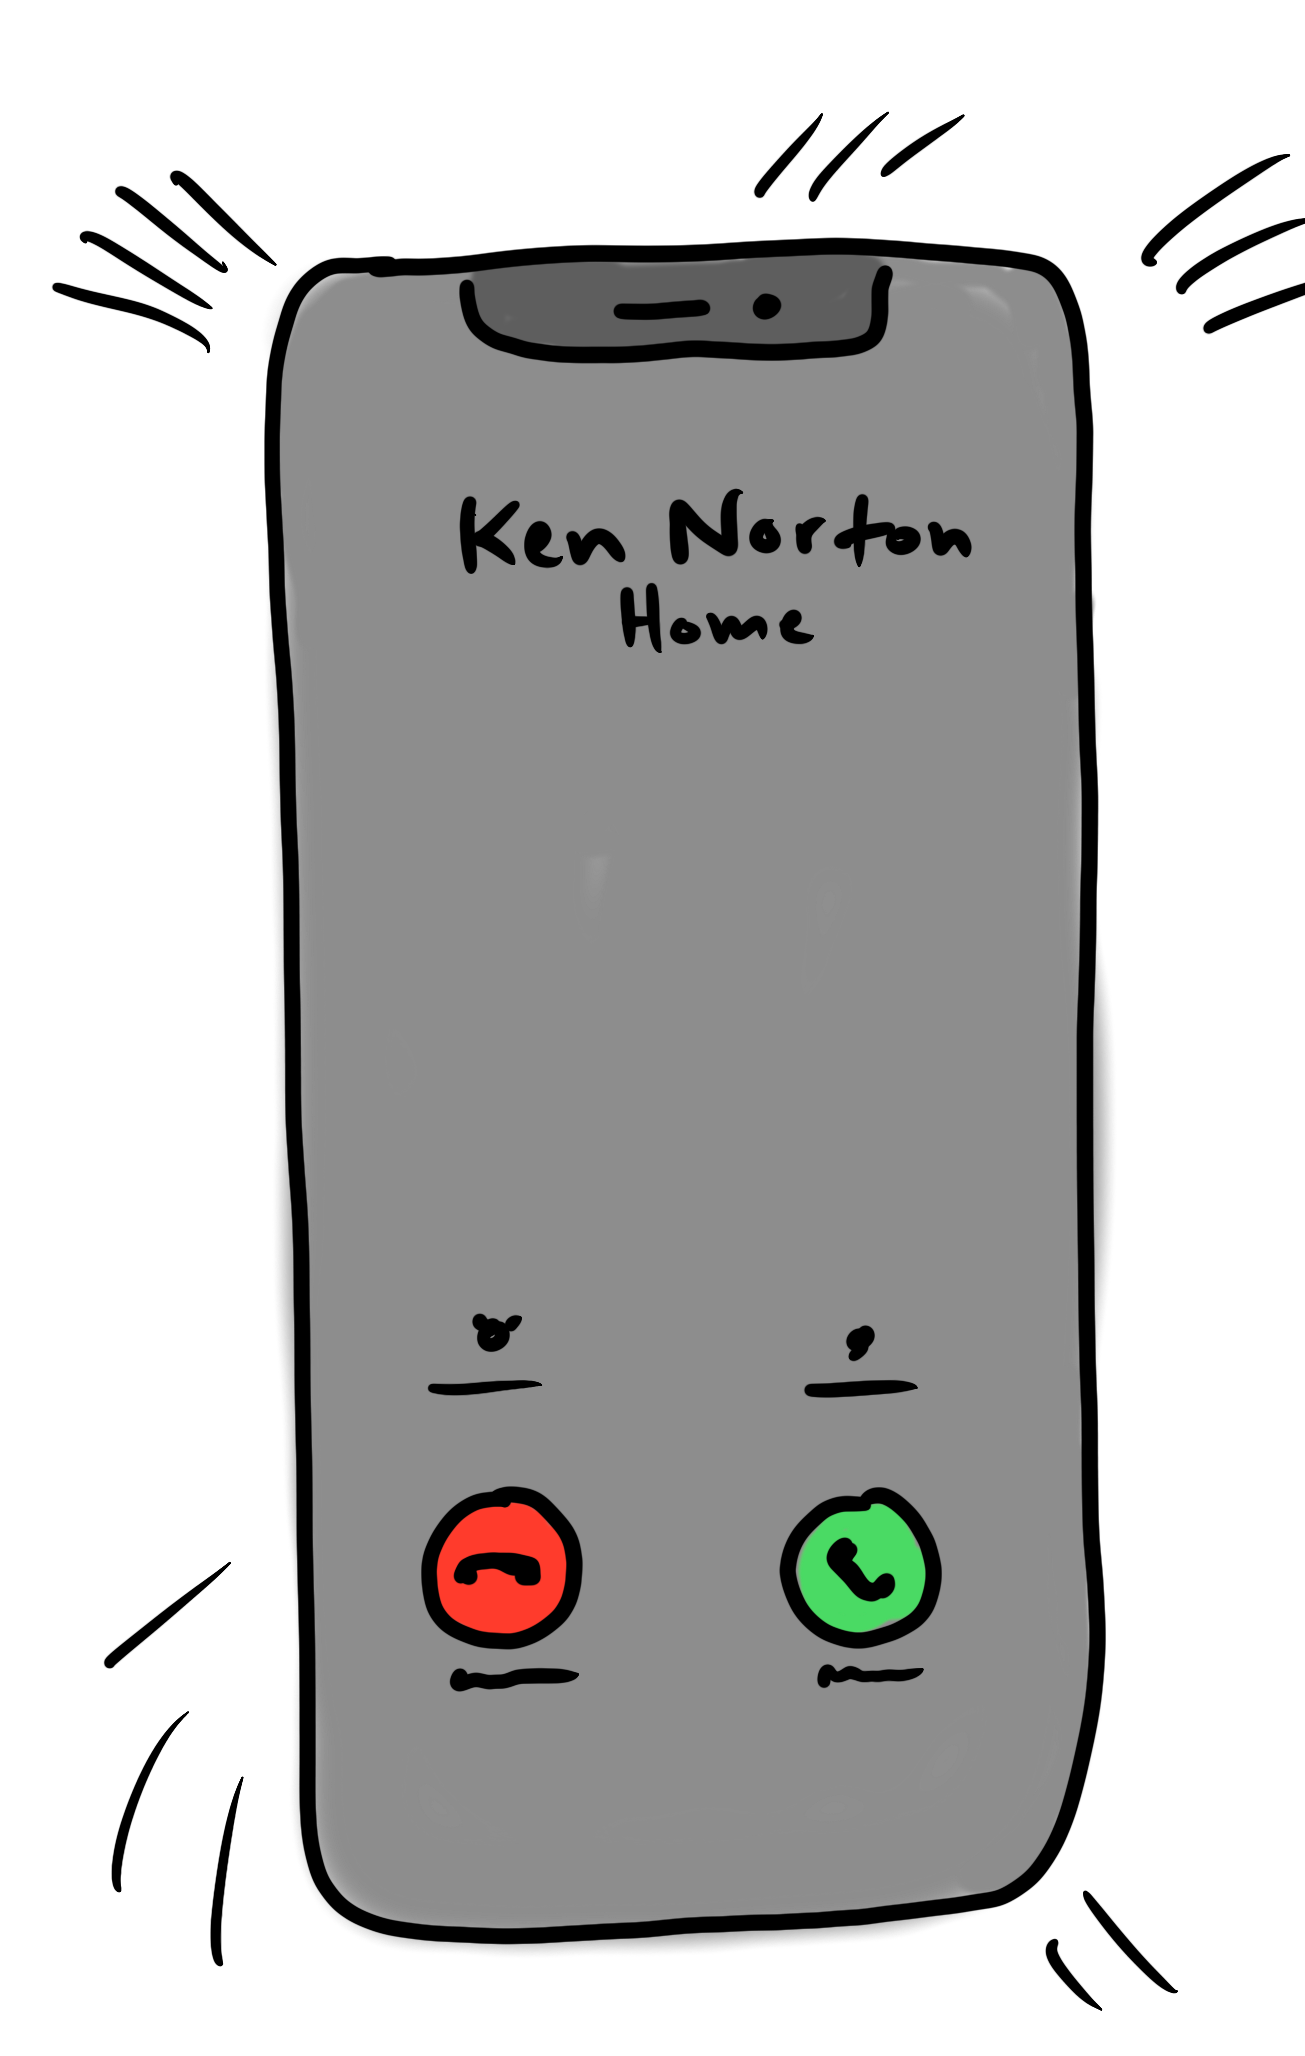 Sketch of a phone ringing